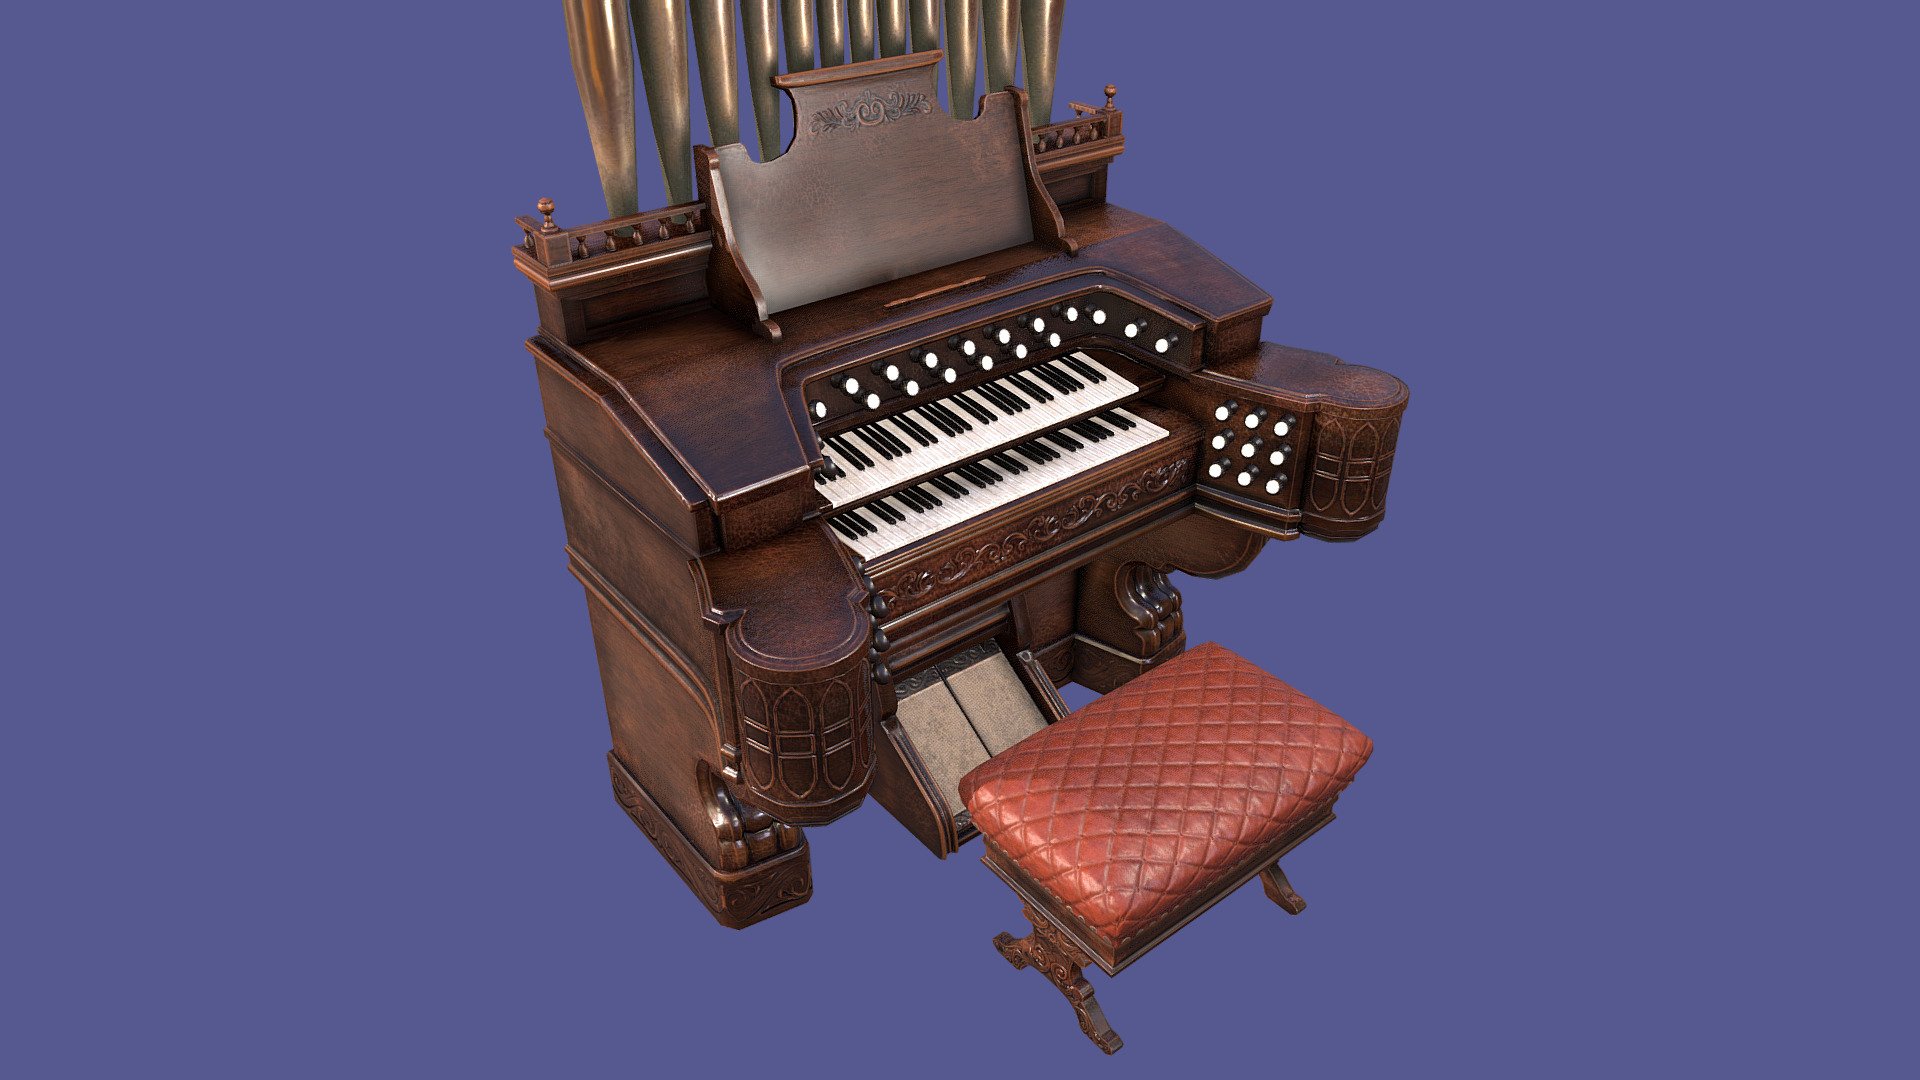 This is a model of an old, vintage or antique looking Victorian Pump Pipe Organ or Piano.

It was inspired or is loosely based on the Nemo's and Haunted House's organs though it's not a close match of them 3d model